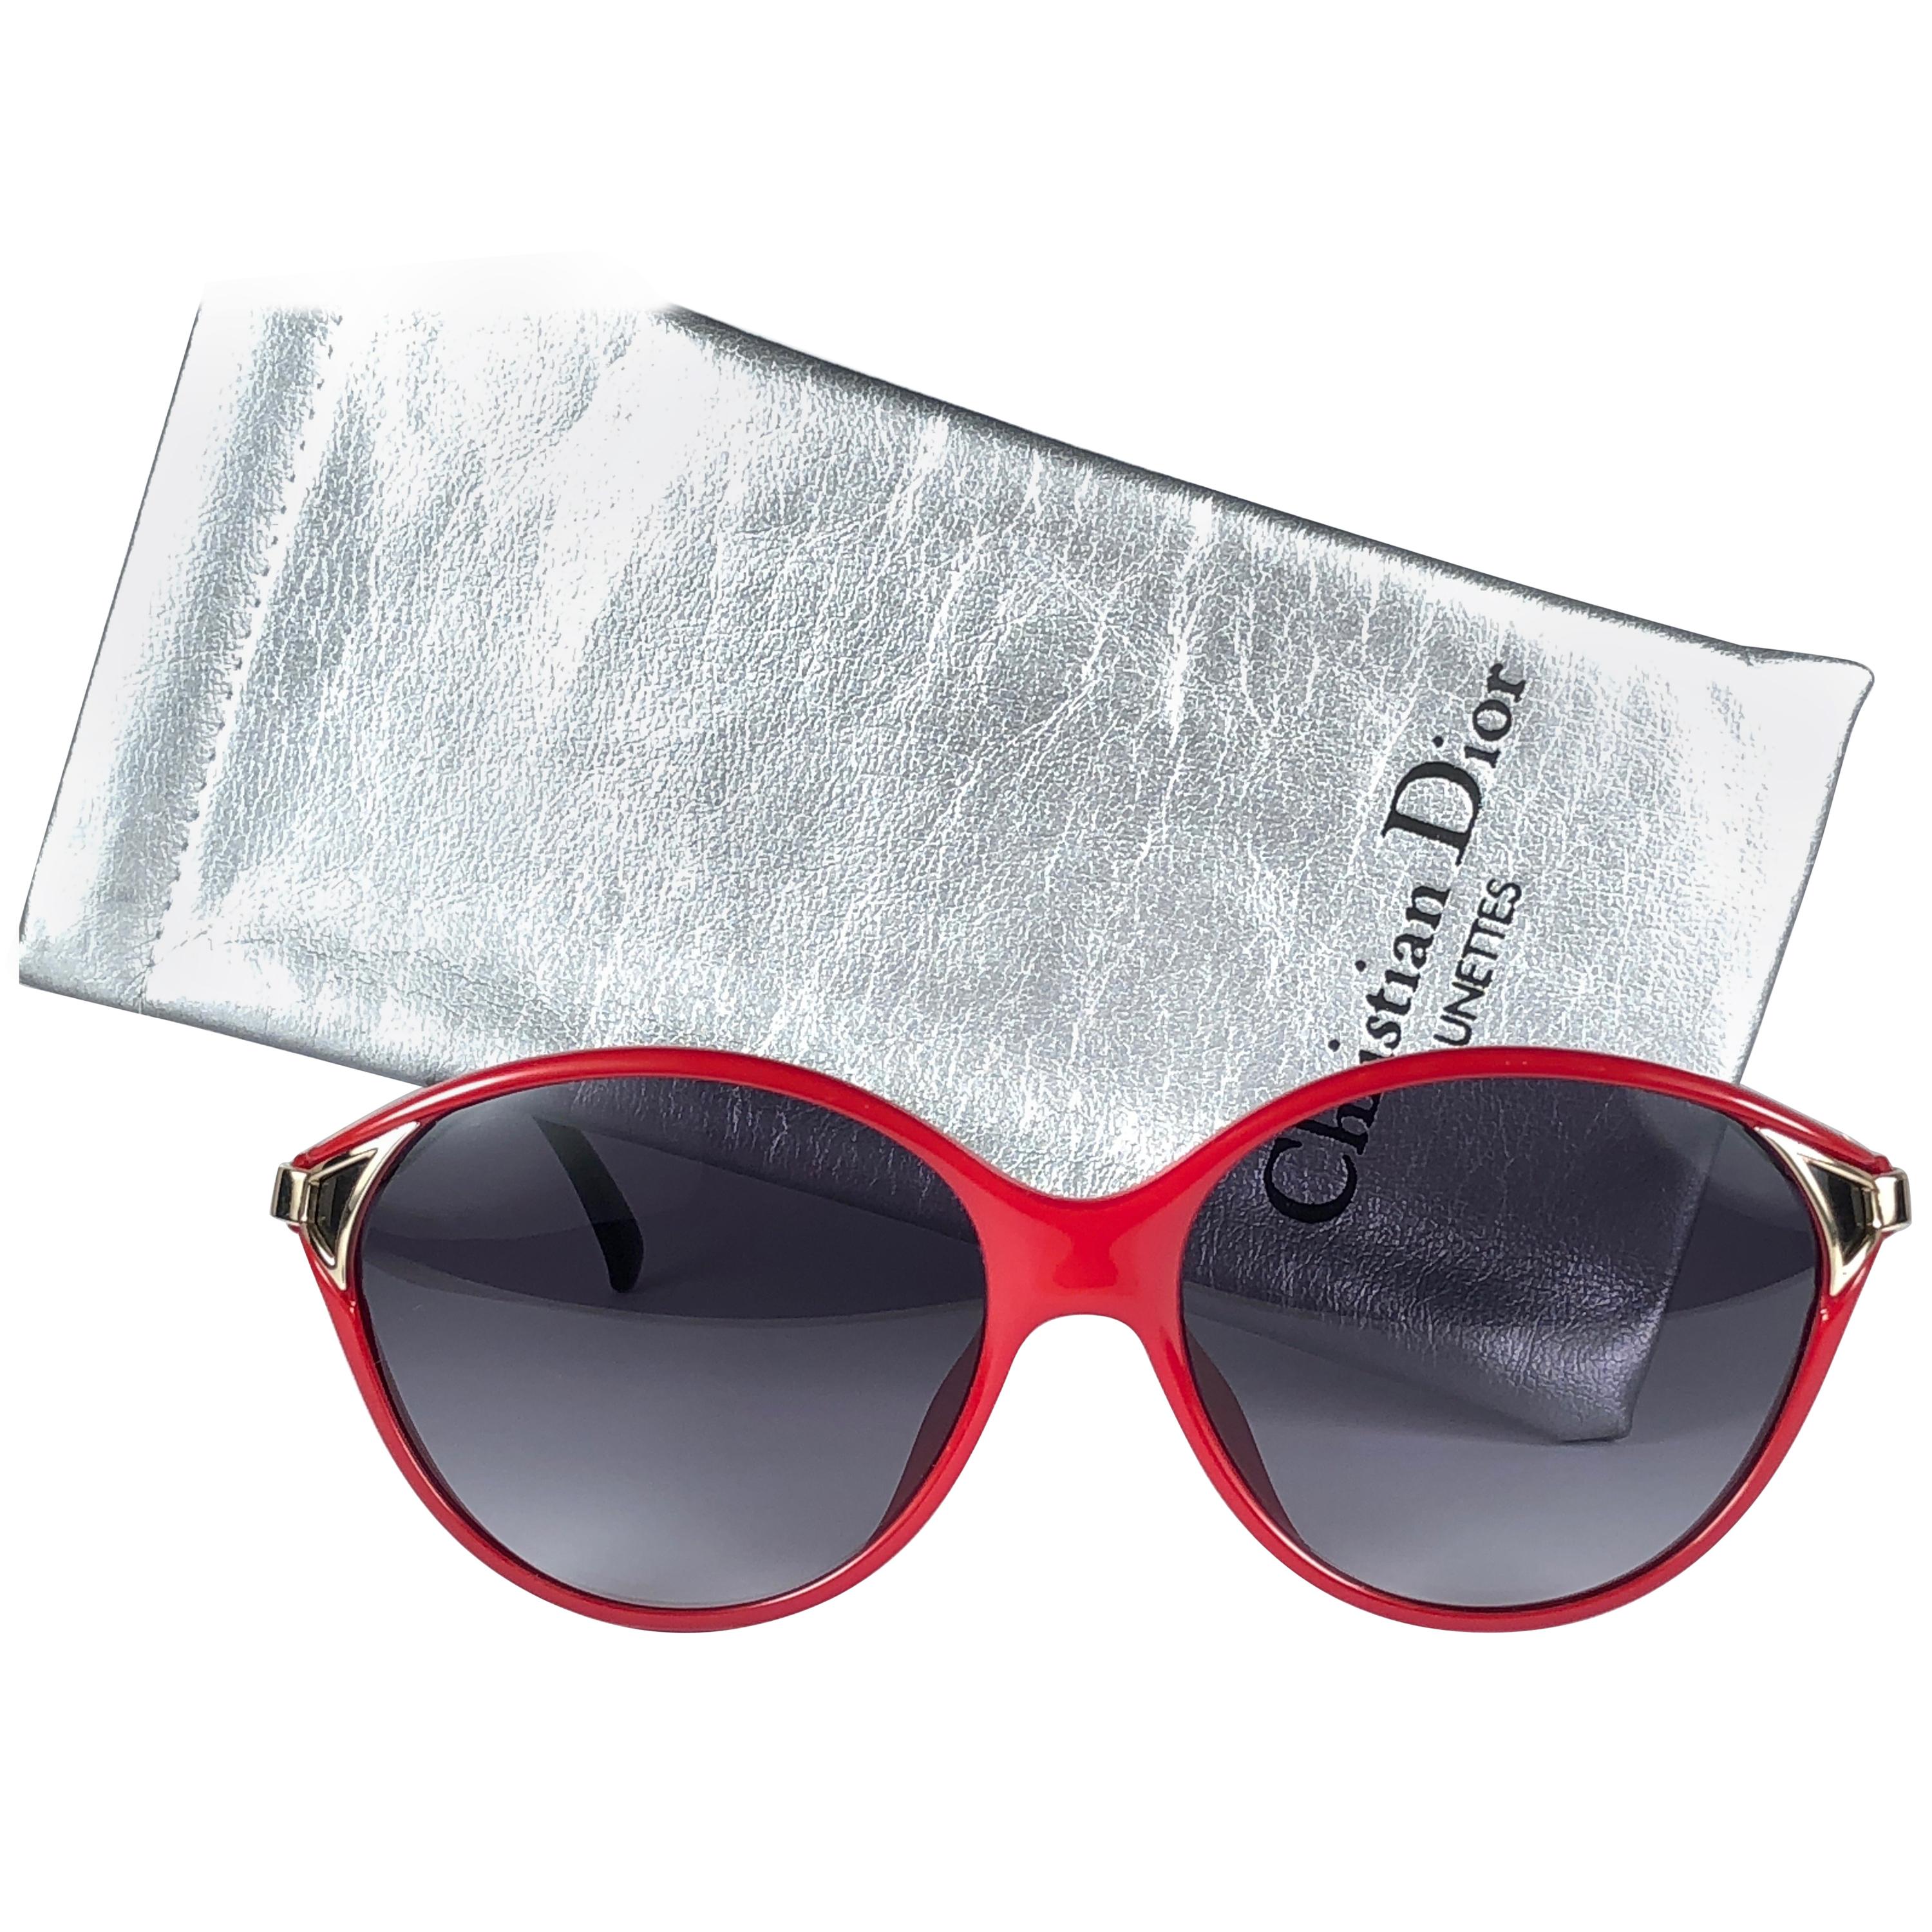  New Vintage Christian Dior 2306 Candy Red Optyl 1980 Sunglasses